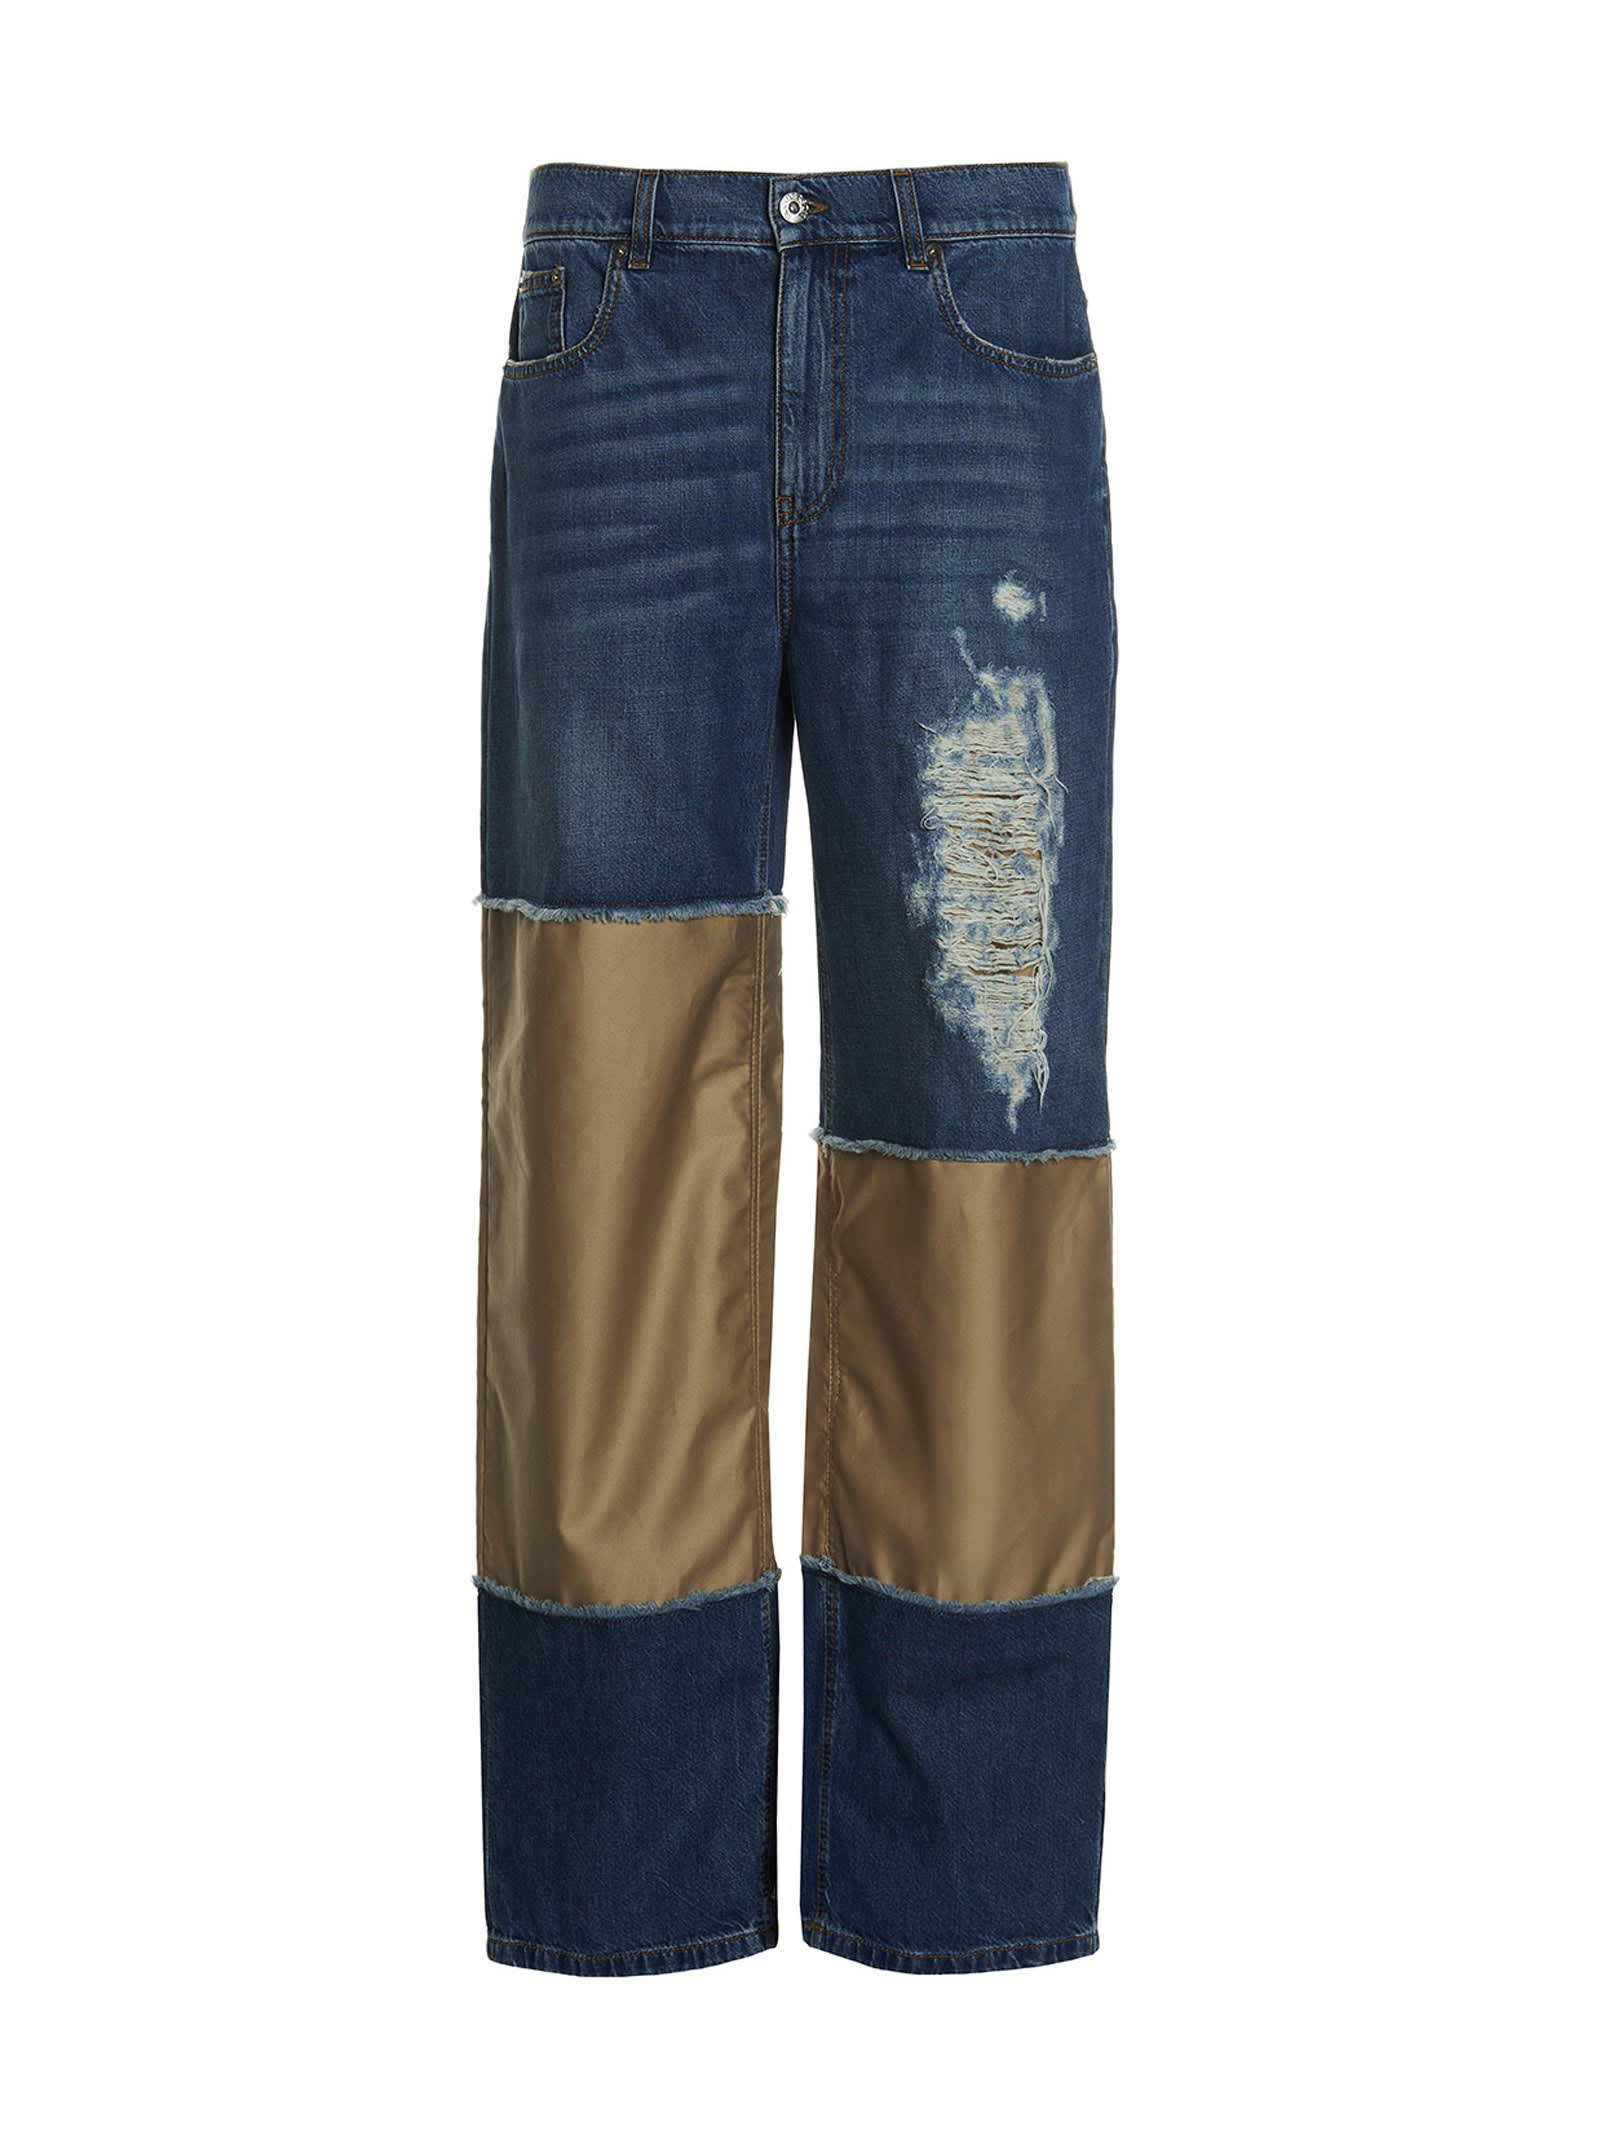 JW ANDERSON DISTRESSED JEANS